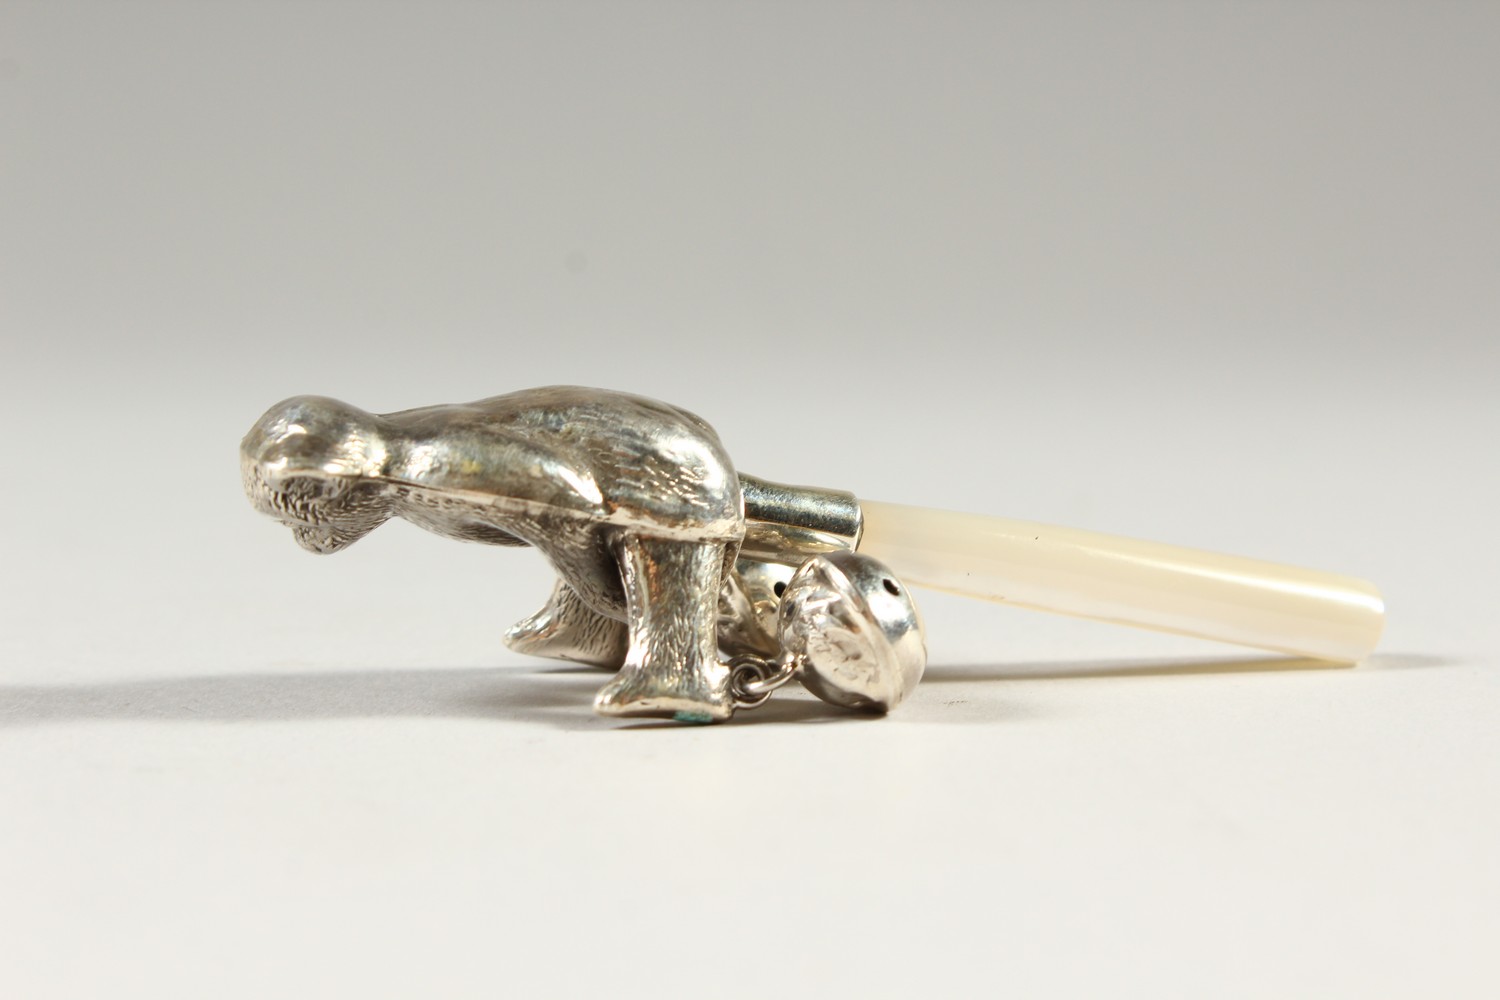 A SILVER TEDDY BEAR RATTLE, with mother-of-pearl handle. 9.5cms long. - Image 2 of 2